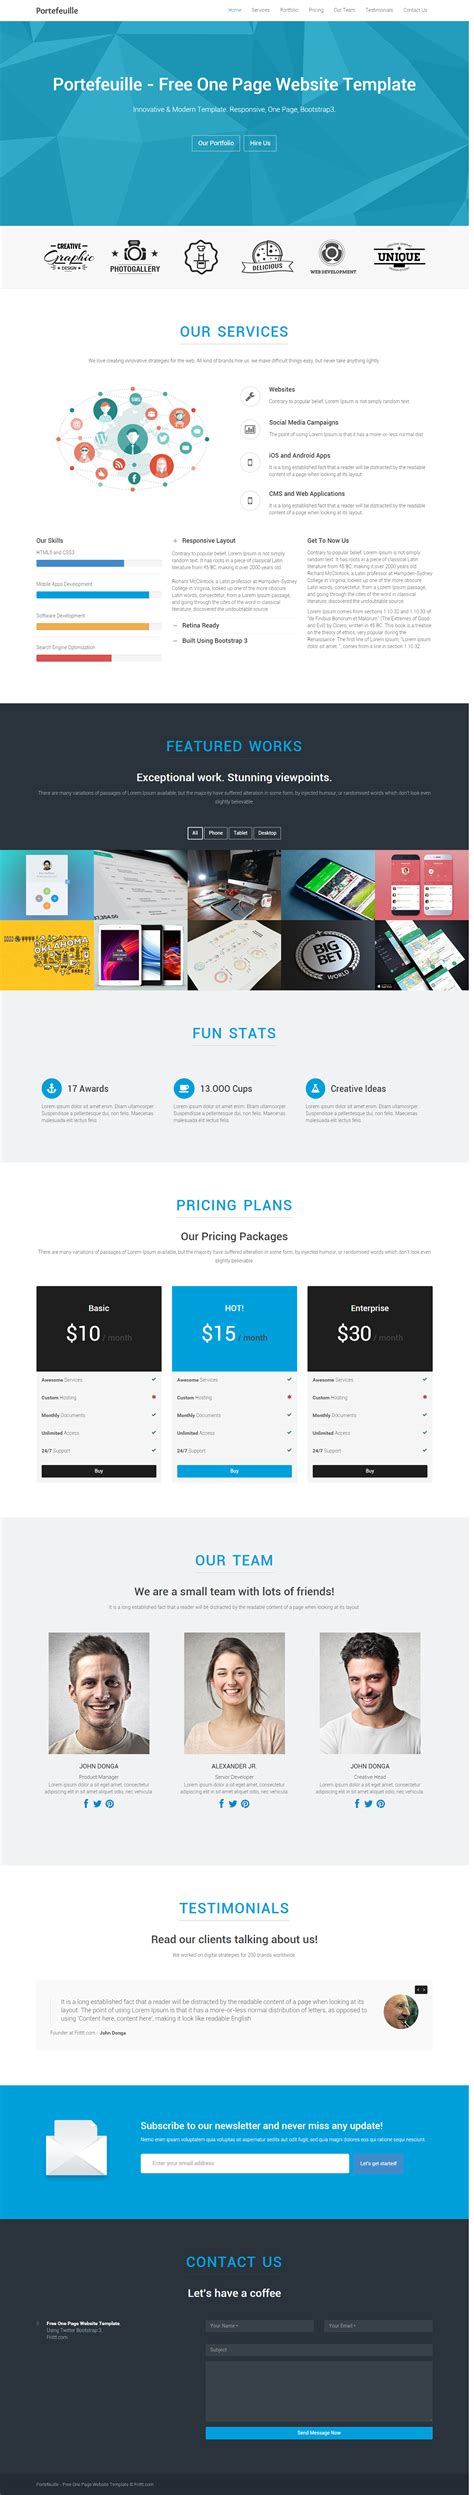 page website template